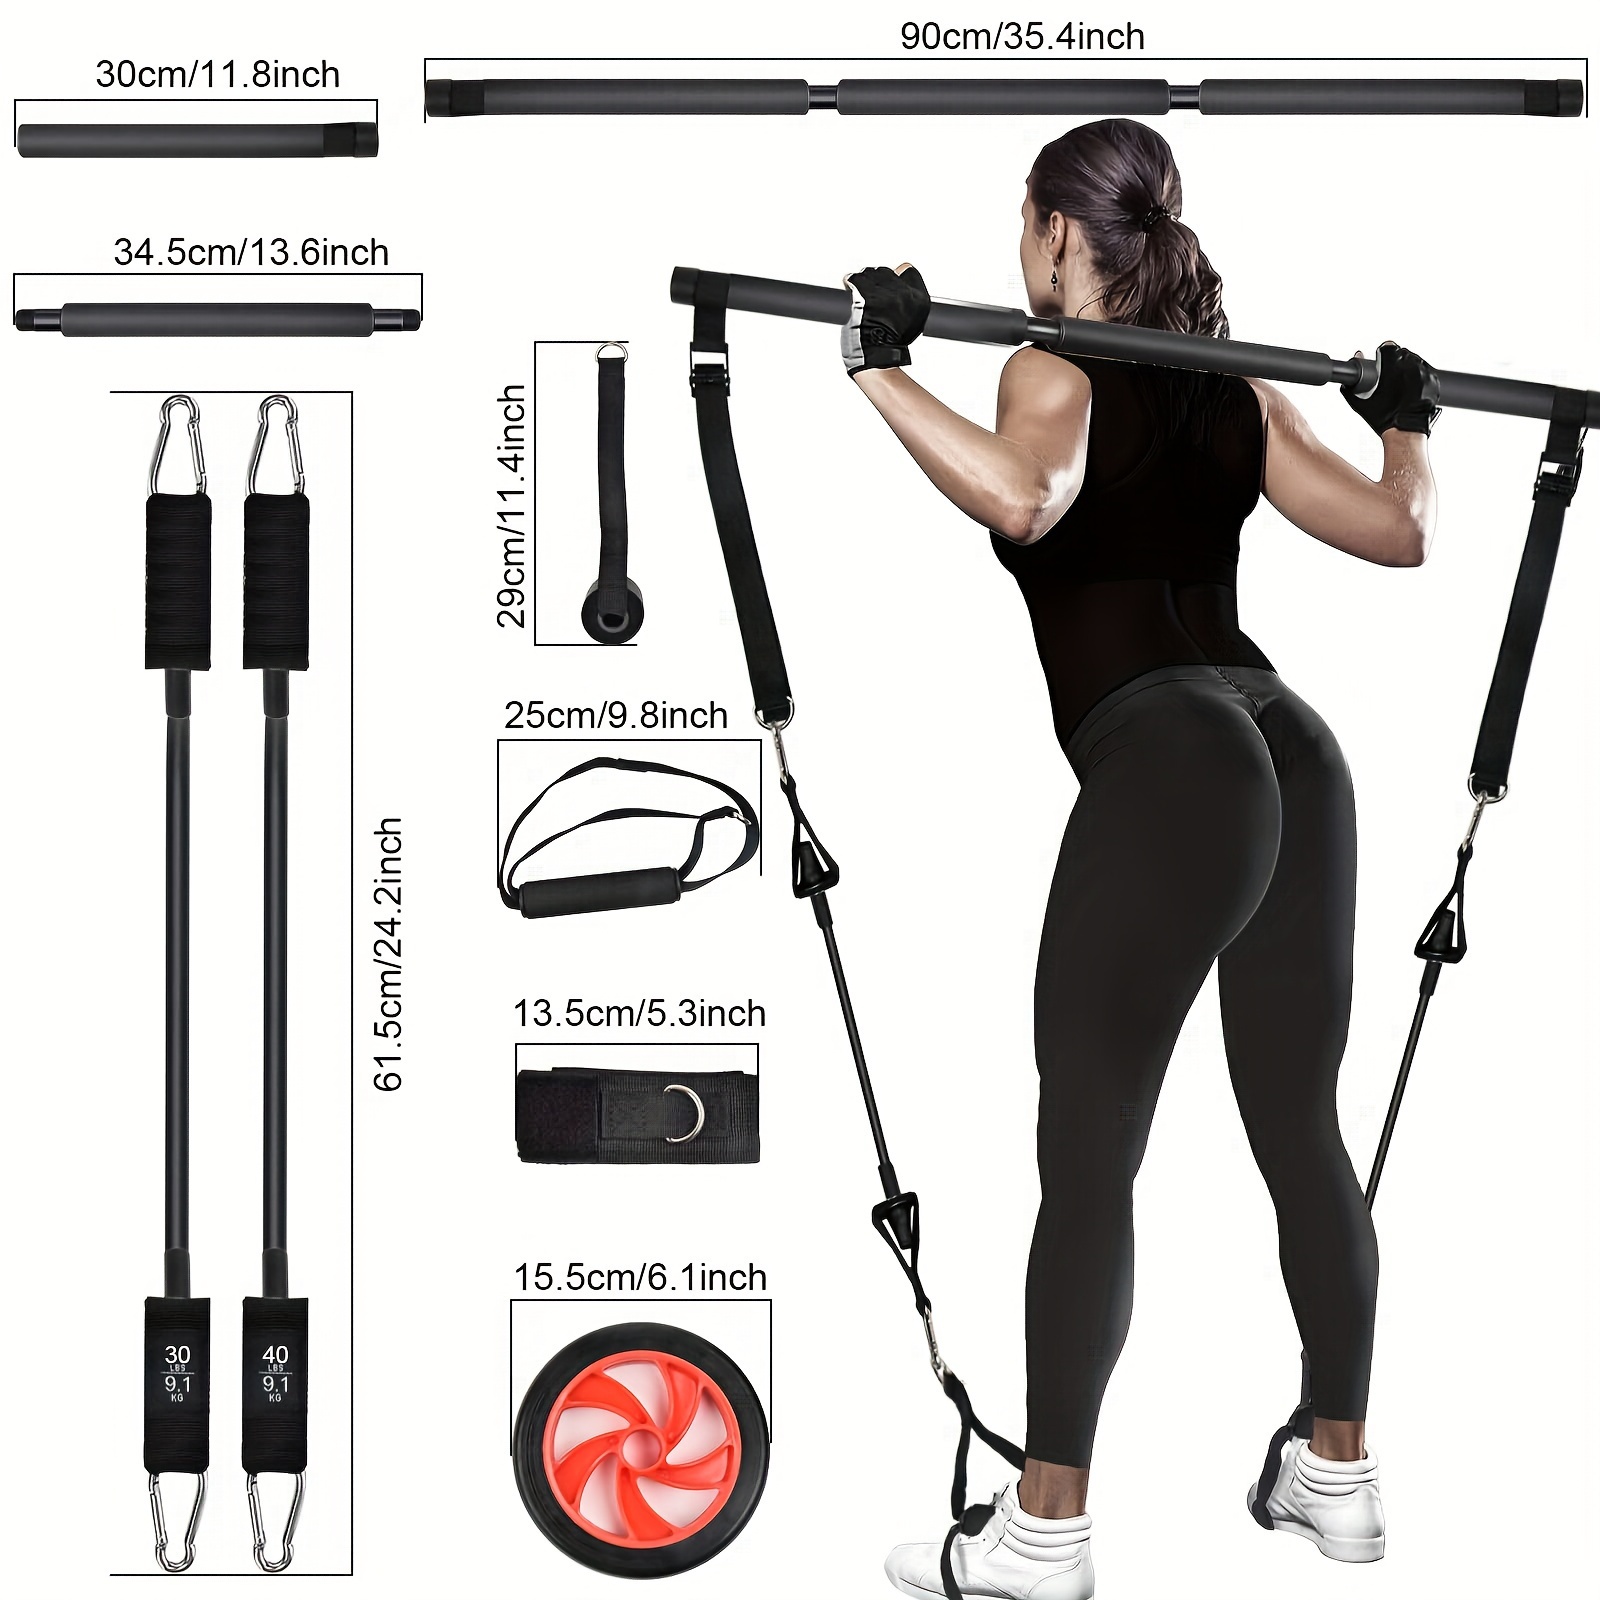 Pilates Yoga Workout Set With Resistance Bands, Fitness Bar, Pull